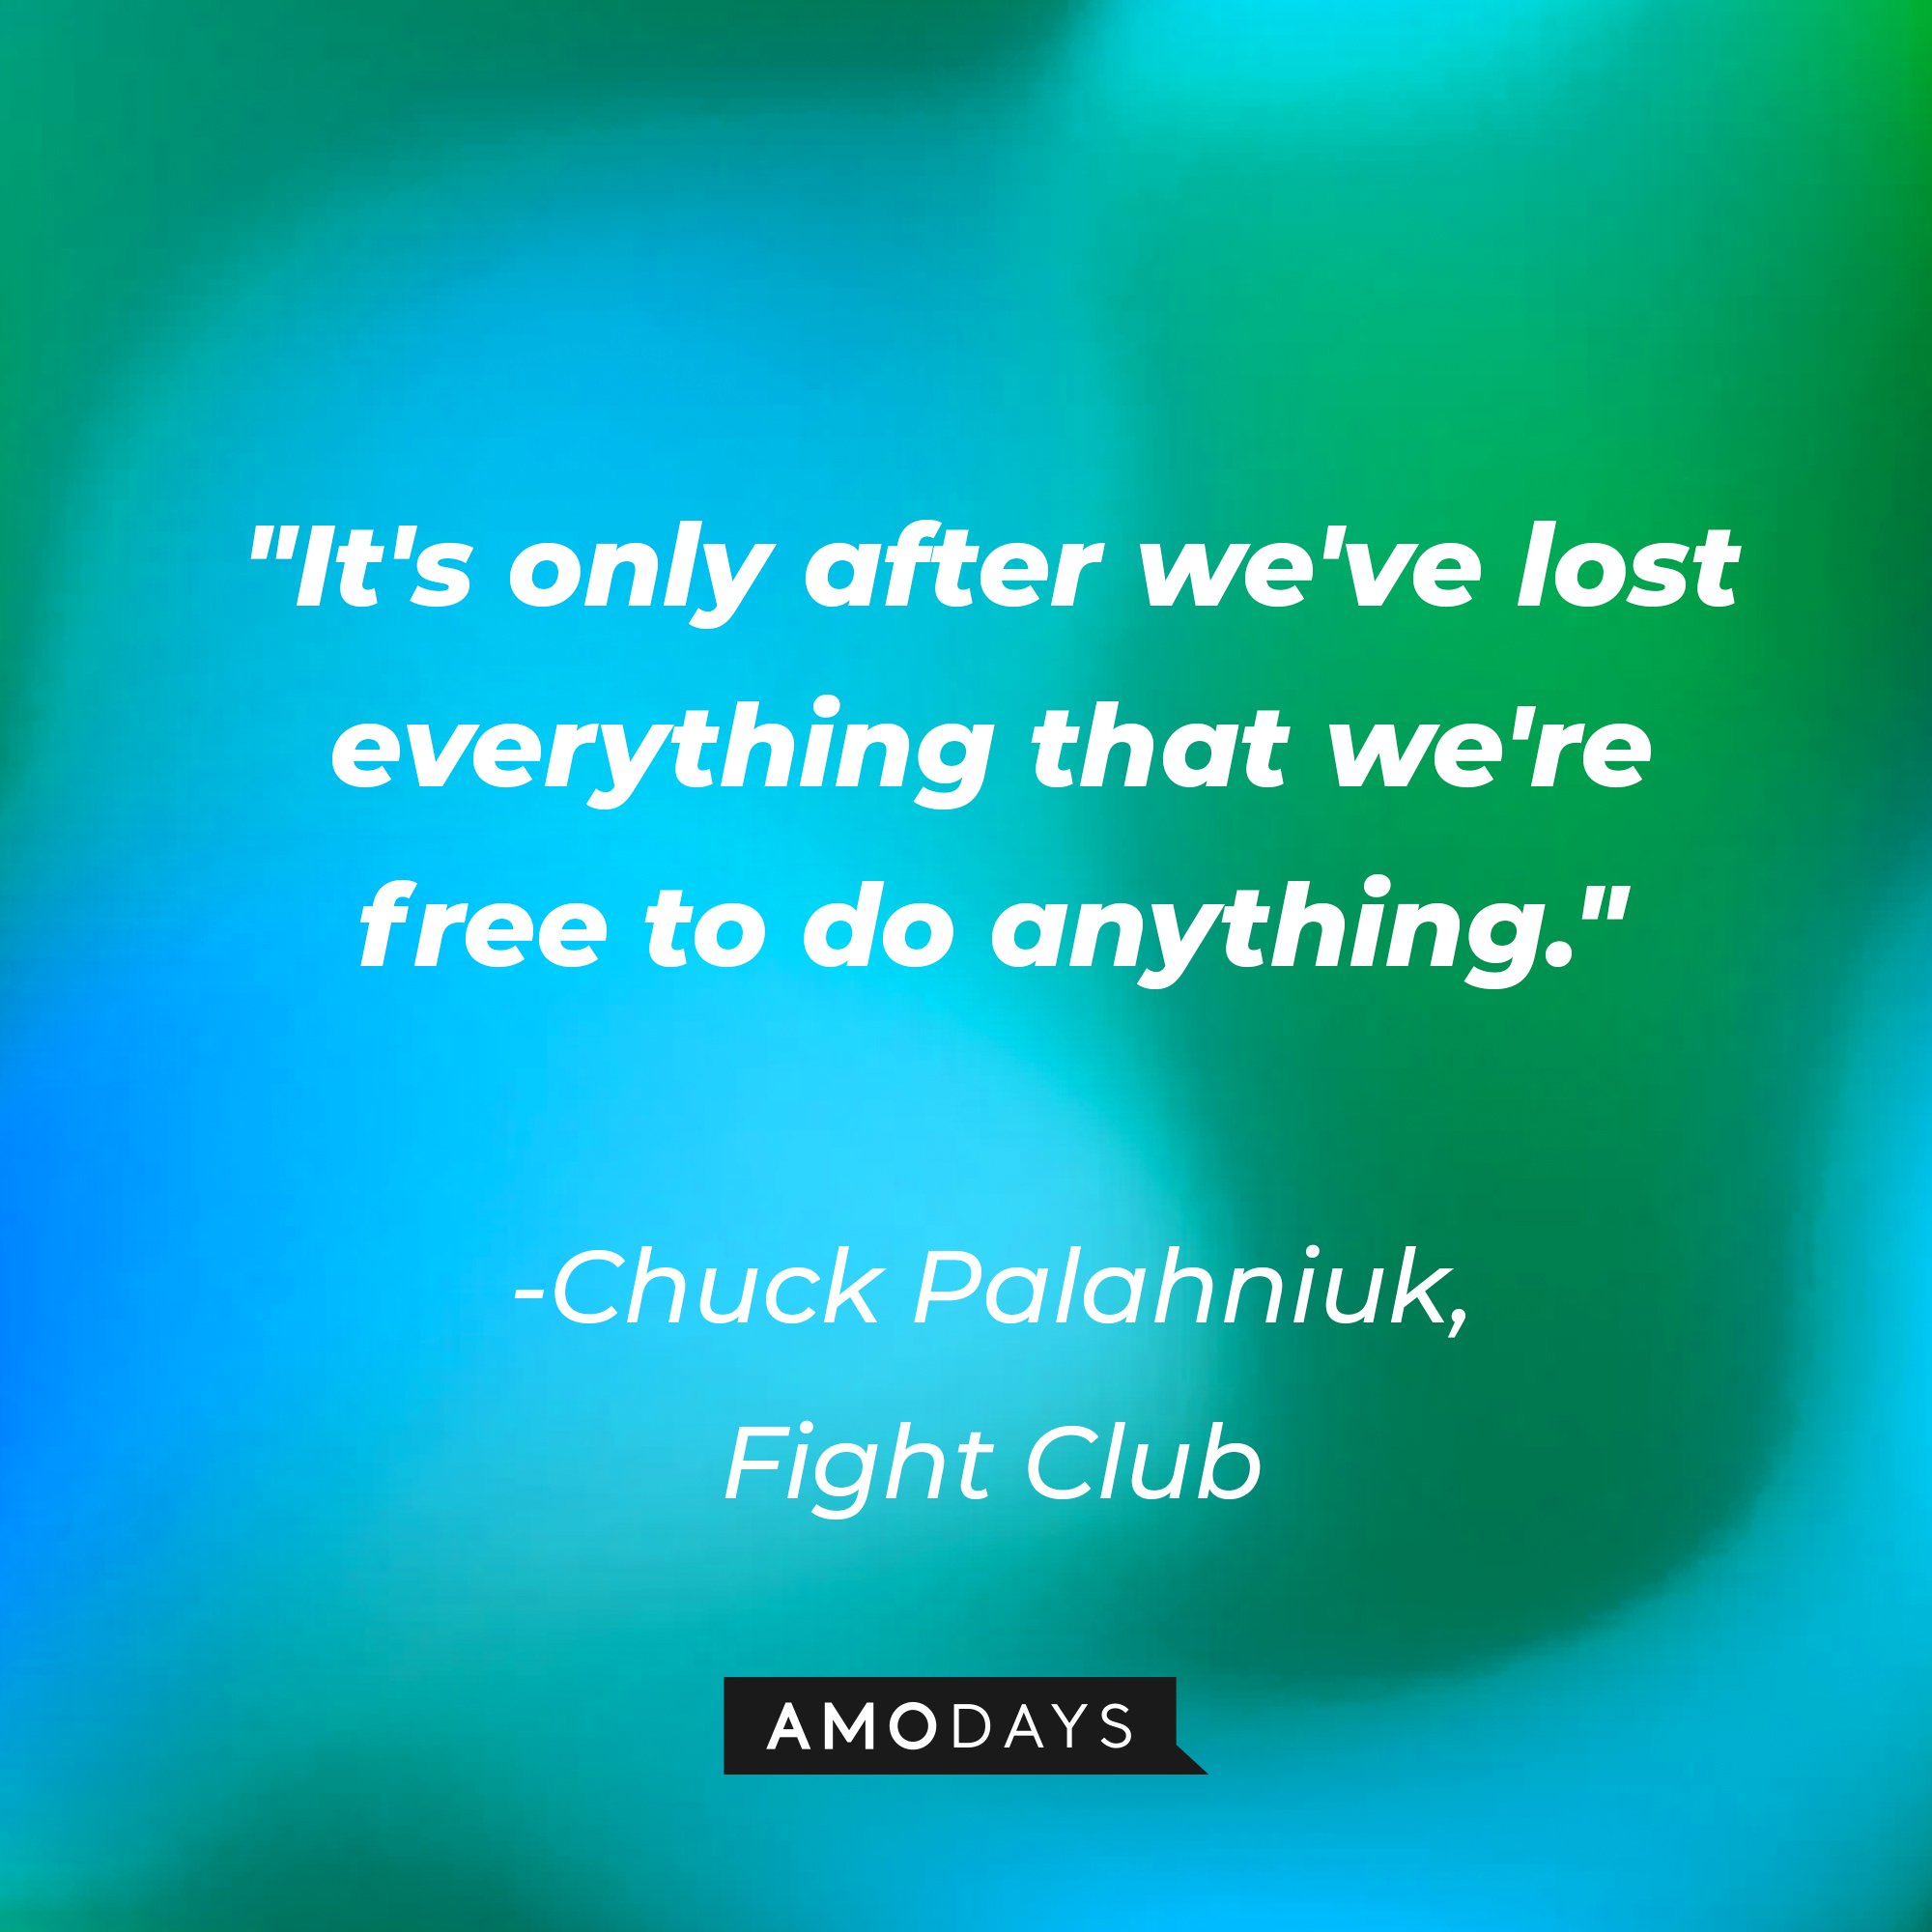 Chuck Palahniuk's quote: "It's only after we've lost everything that we're free to do anything." | Image: Amodays